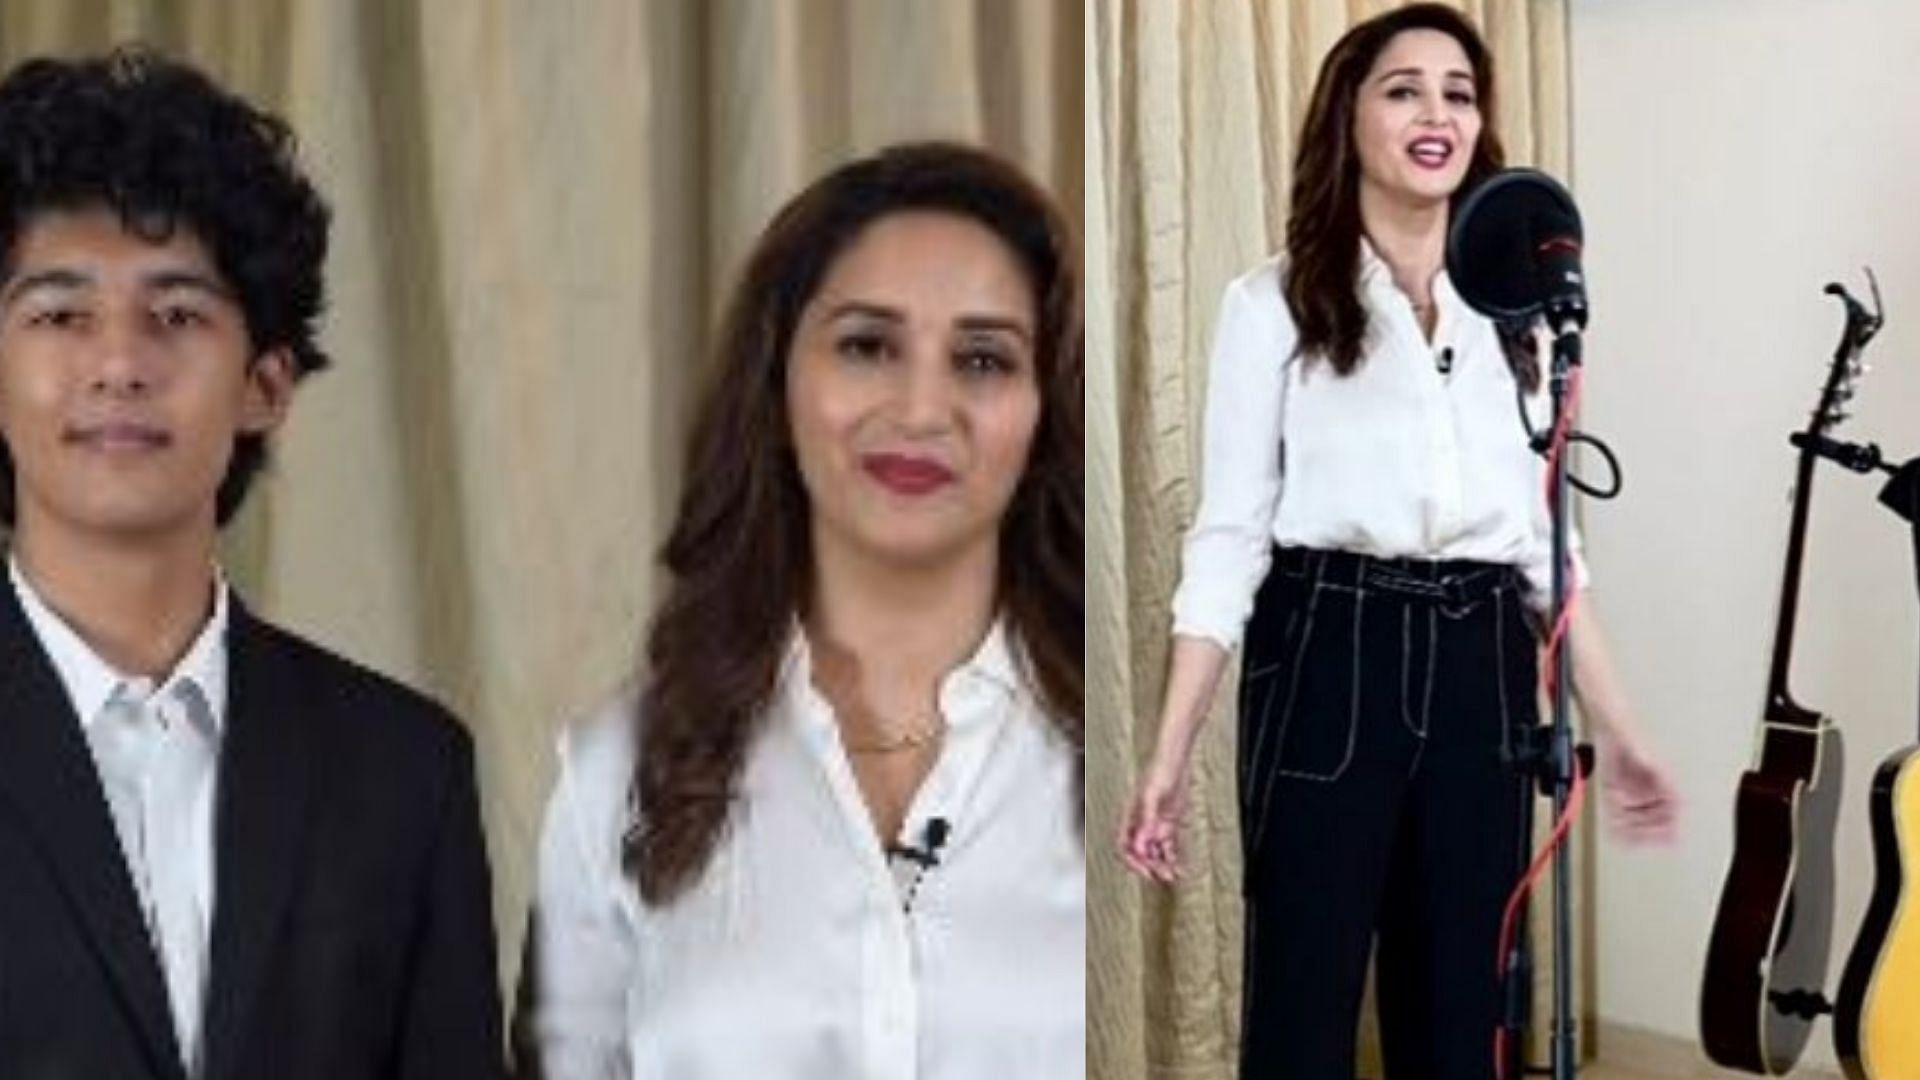 Madhuri Dixit performed for the ‘I For India’ fundraising concert